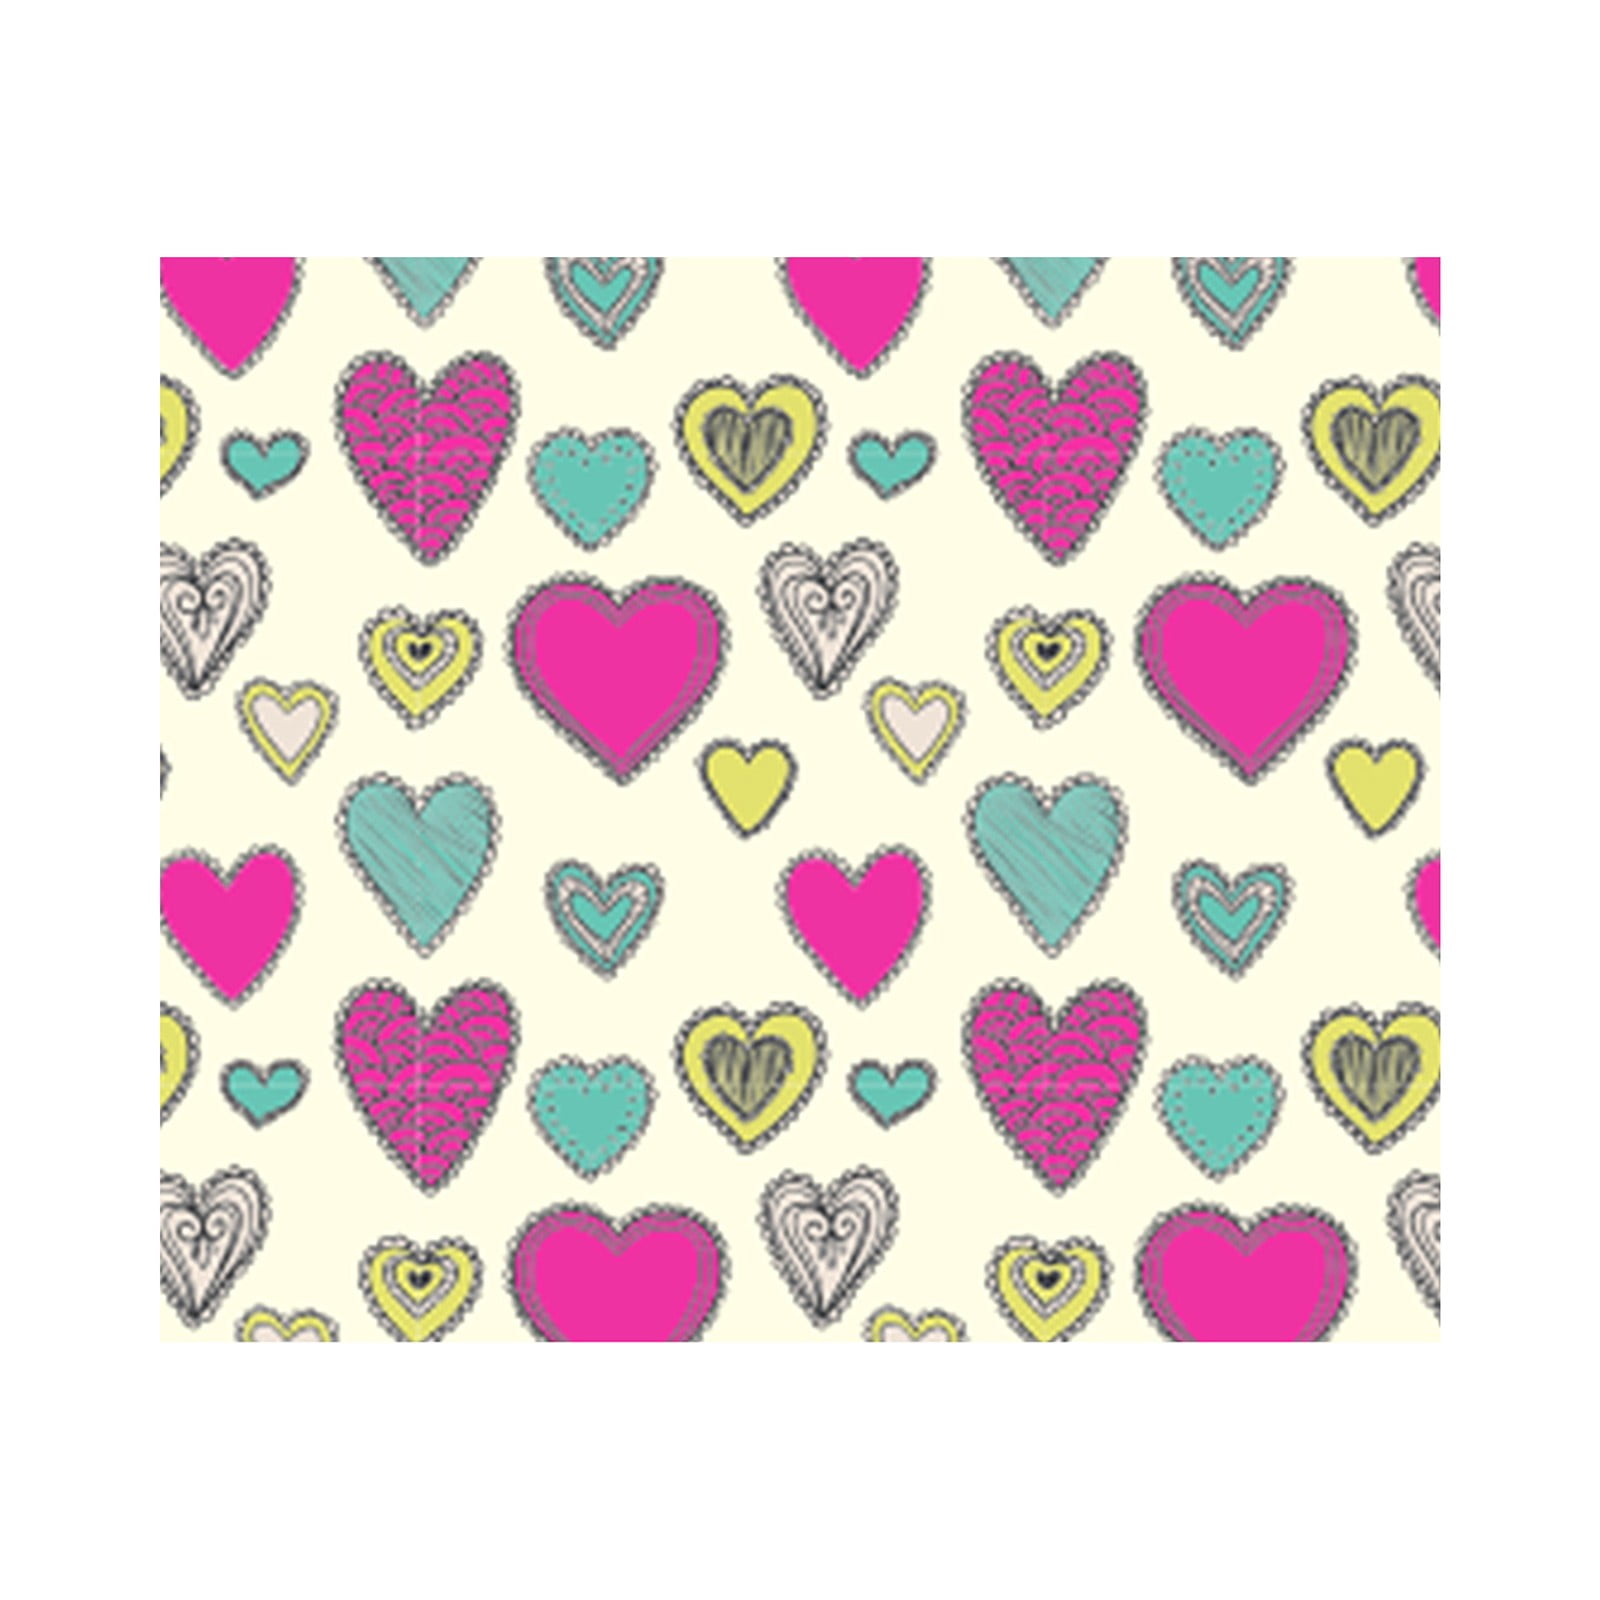 Yubnlvae Home Decor Valentine's Day Wrapping Paper Roll-Pink Love Heart, Very Suitable for Birthday, Holiday, Mother's Day, Wedding, Valentine's Day